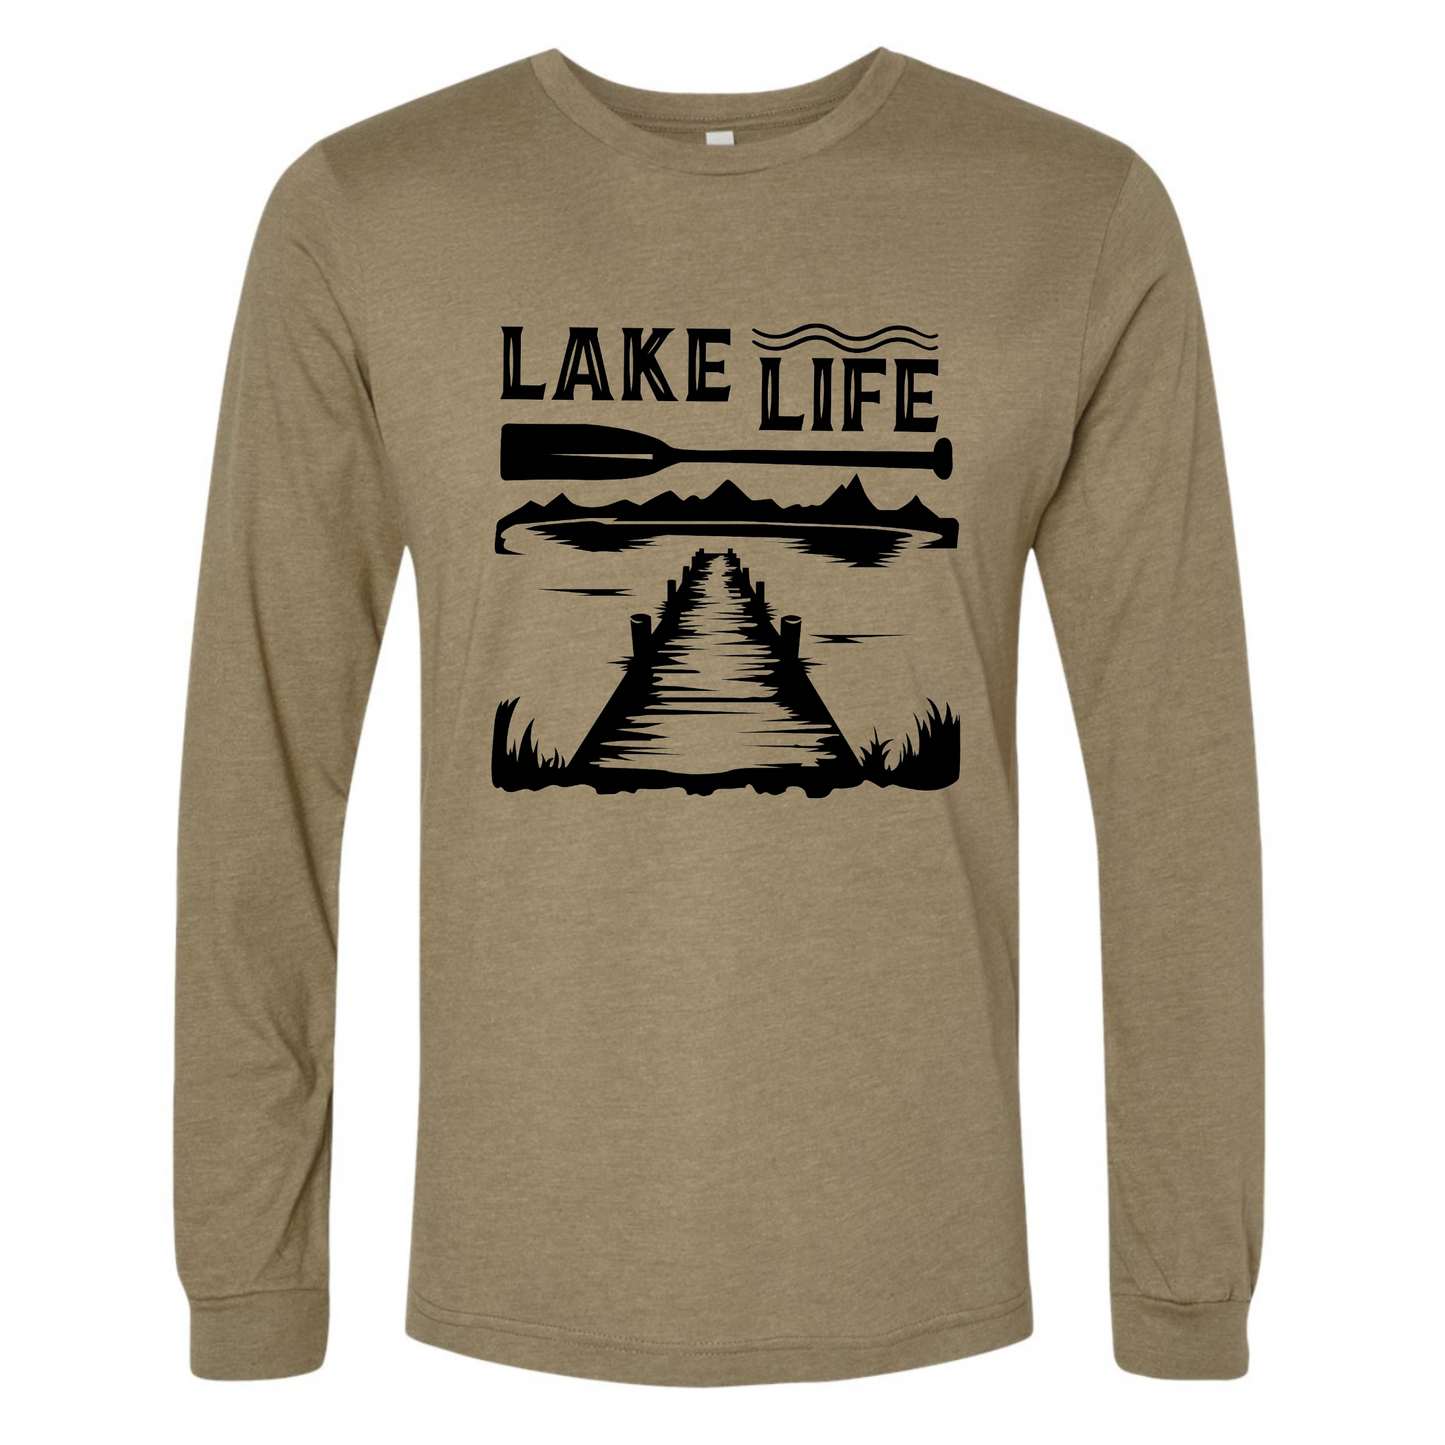 Lake Life Long Sleeve T-Shirt in heather olive - front view